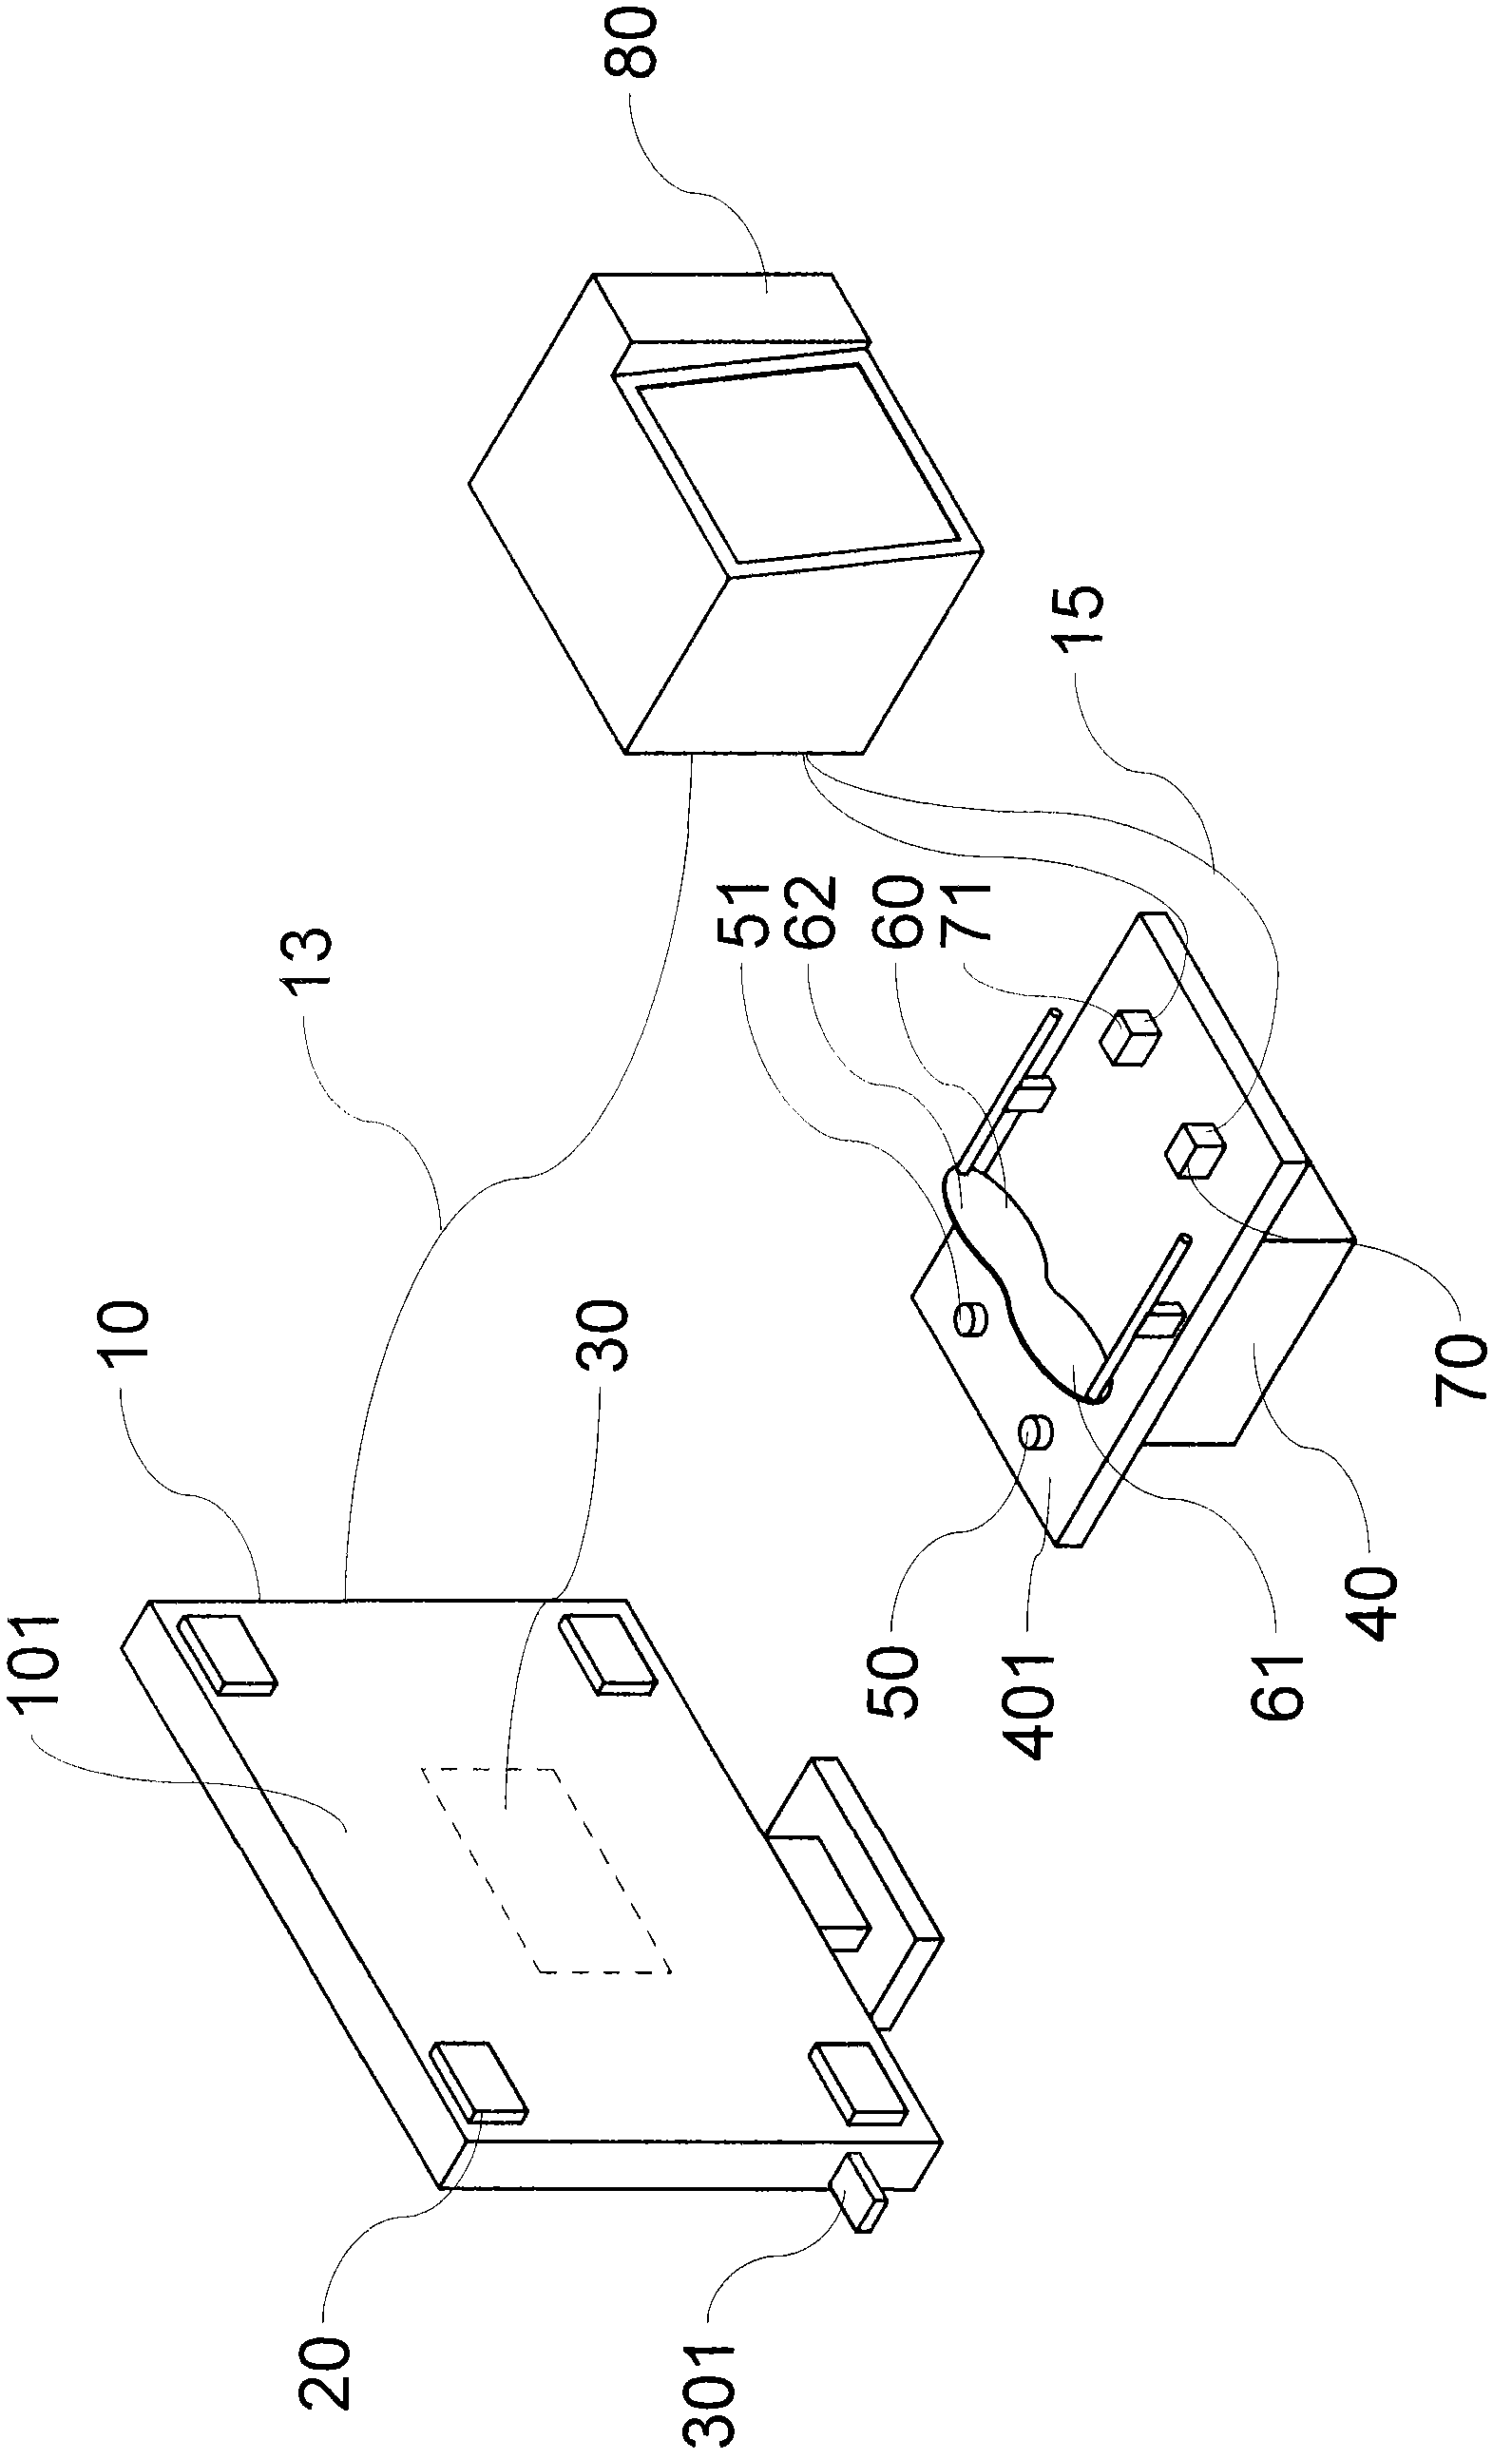 Adjustment system of three-dimensional (3D) display synchronous signals